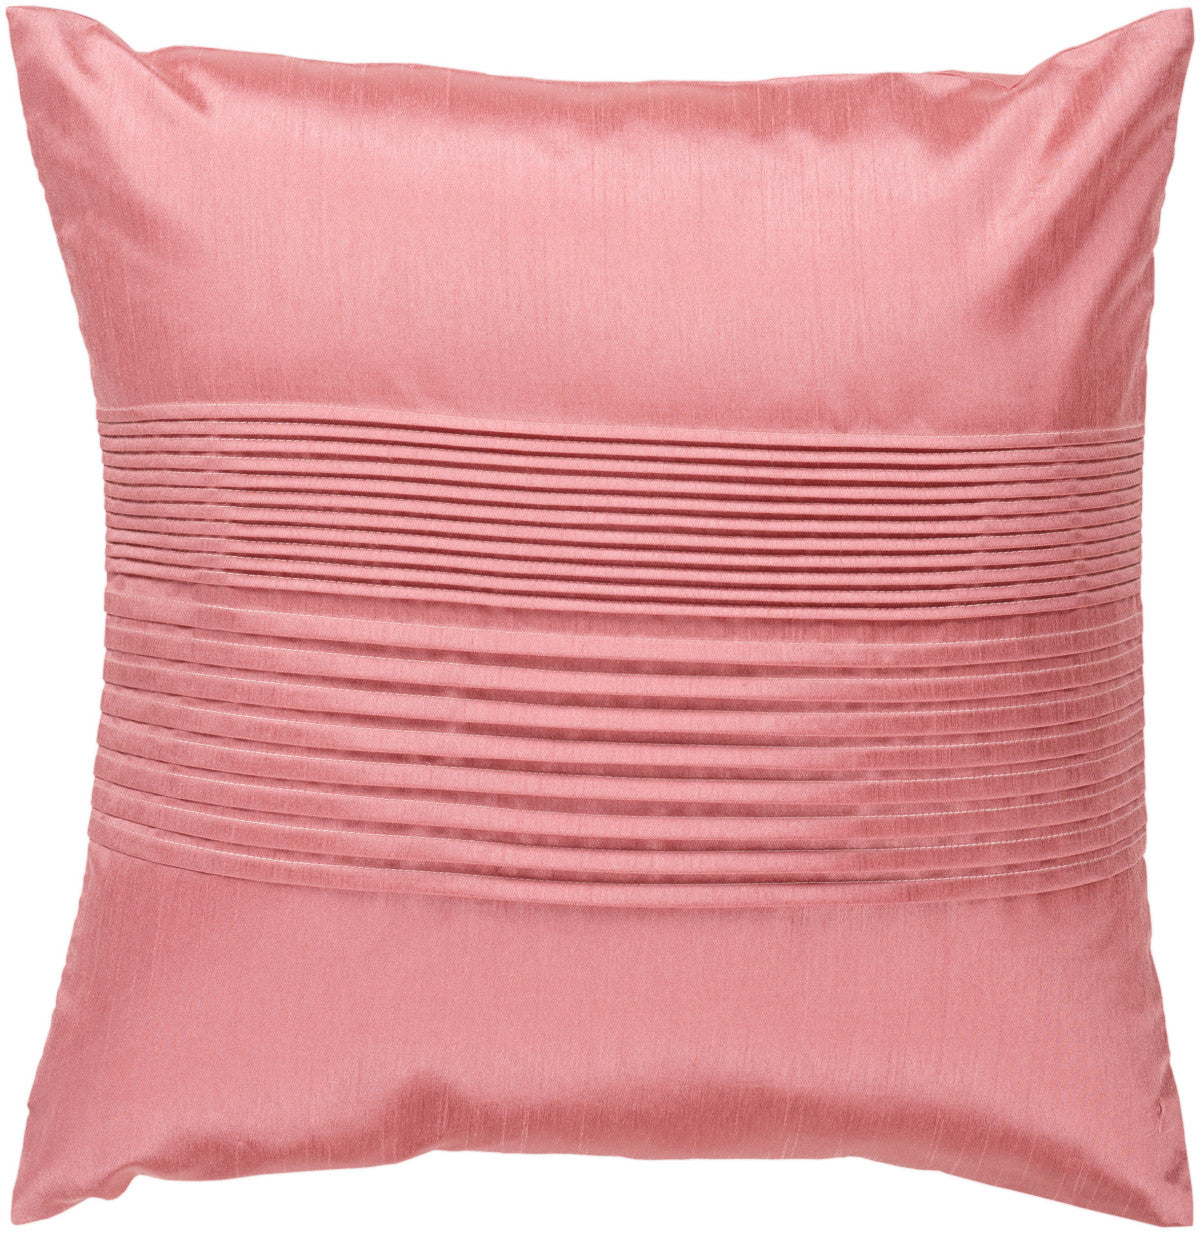 Surya Solid Pleated Lori Lee HH-023 Pillow